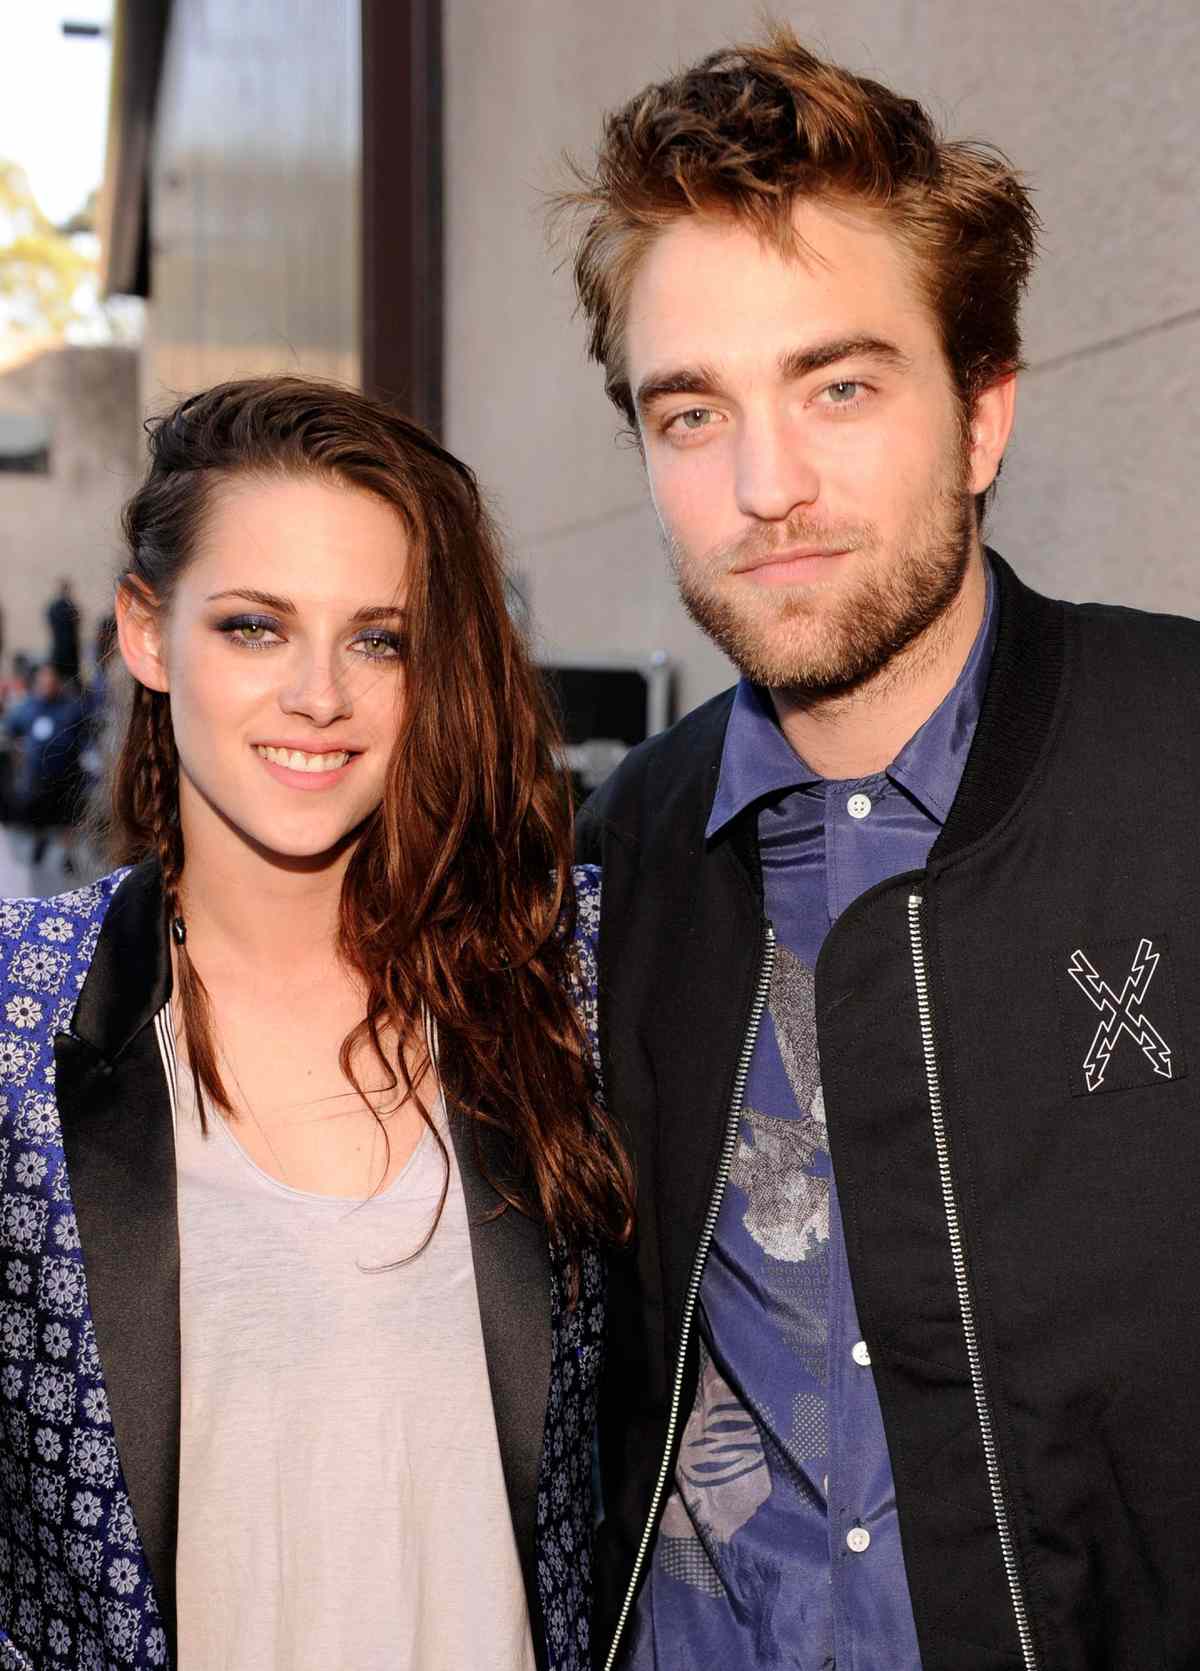 who is dating rob pattinson